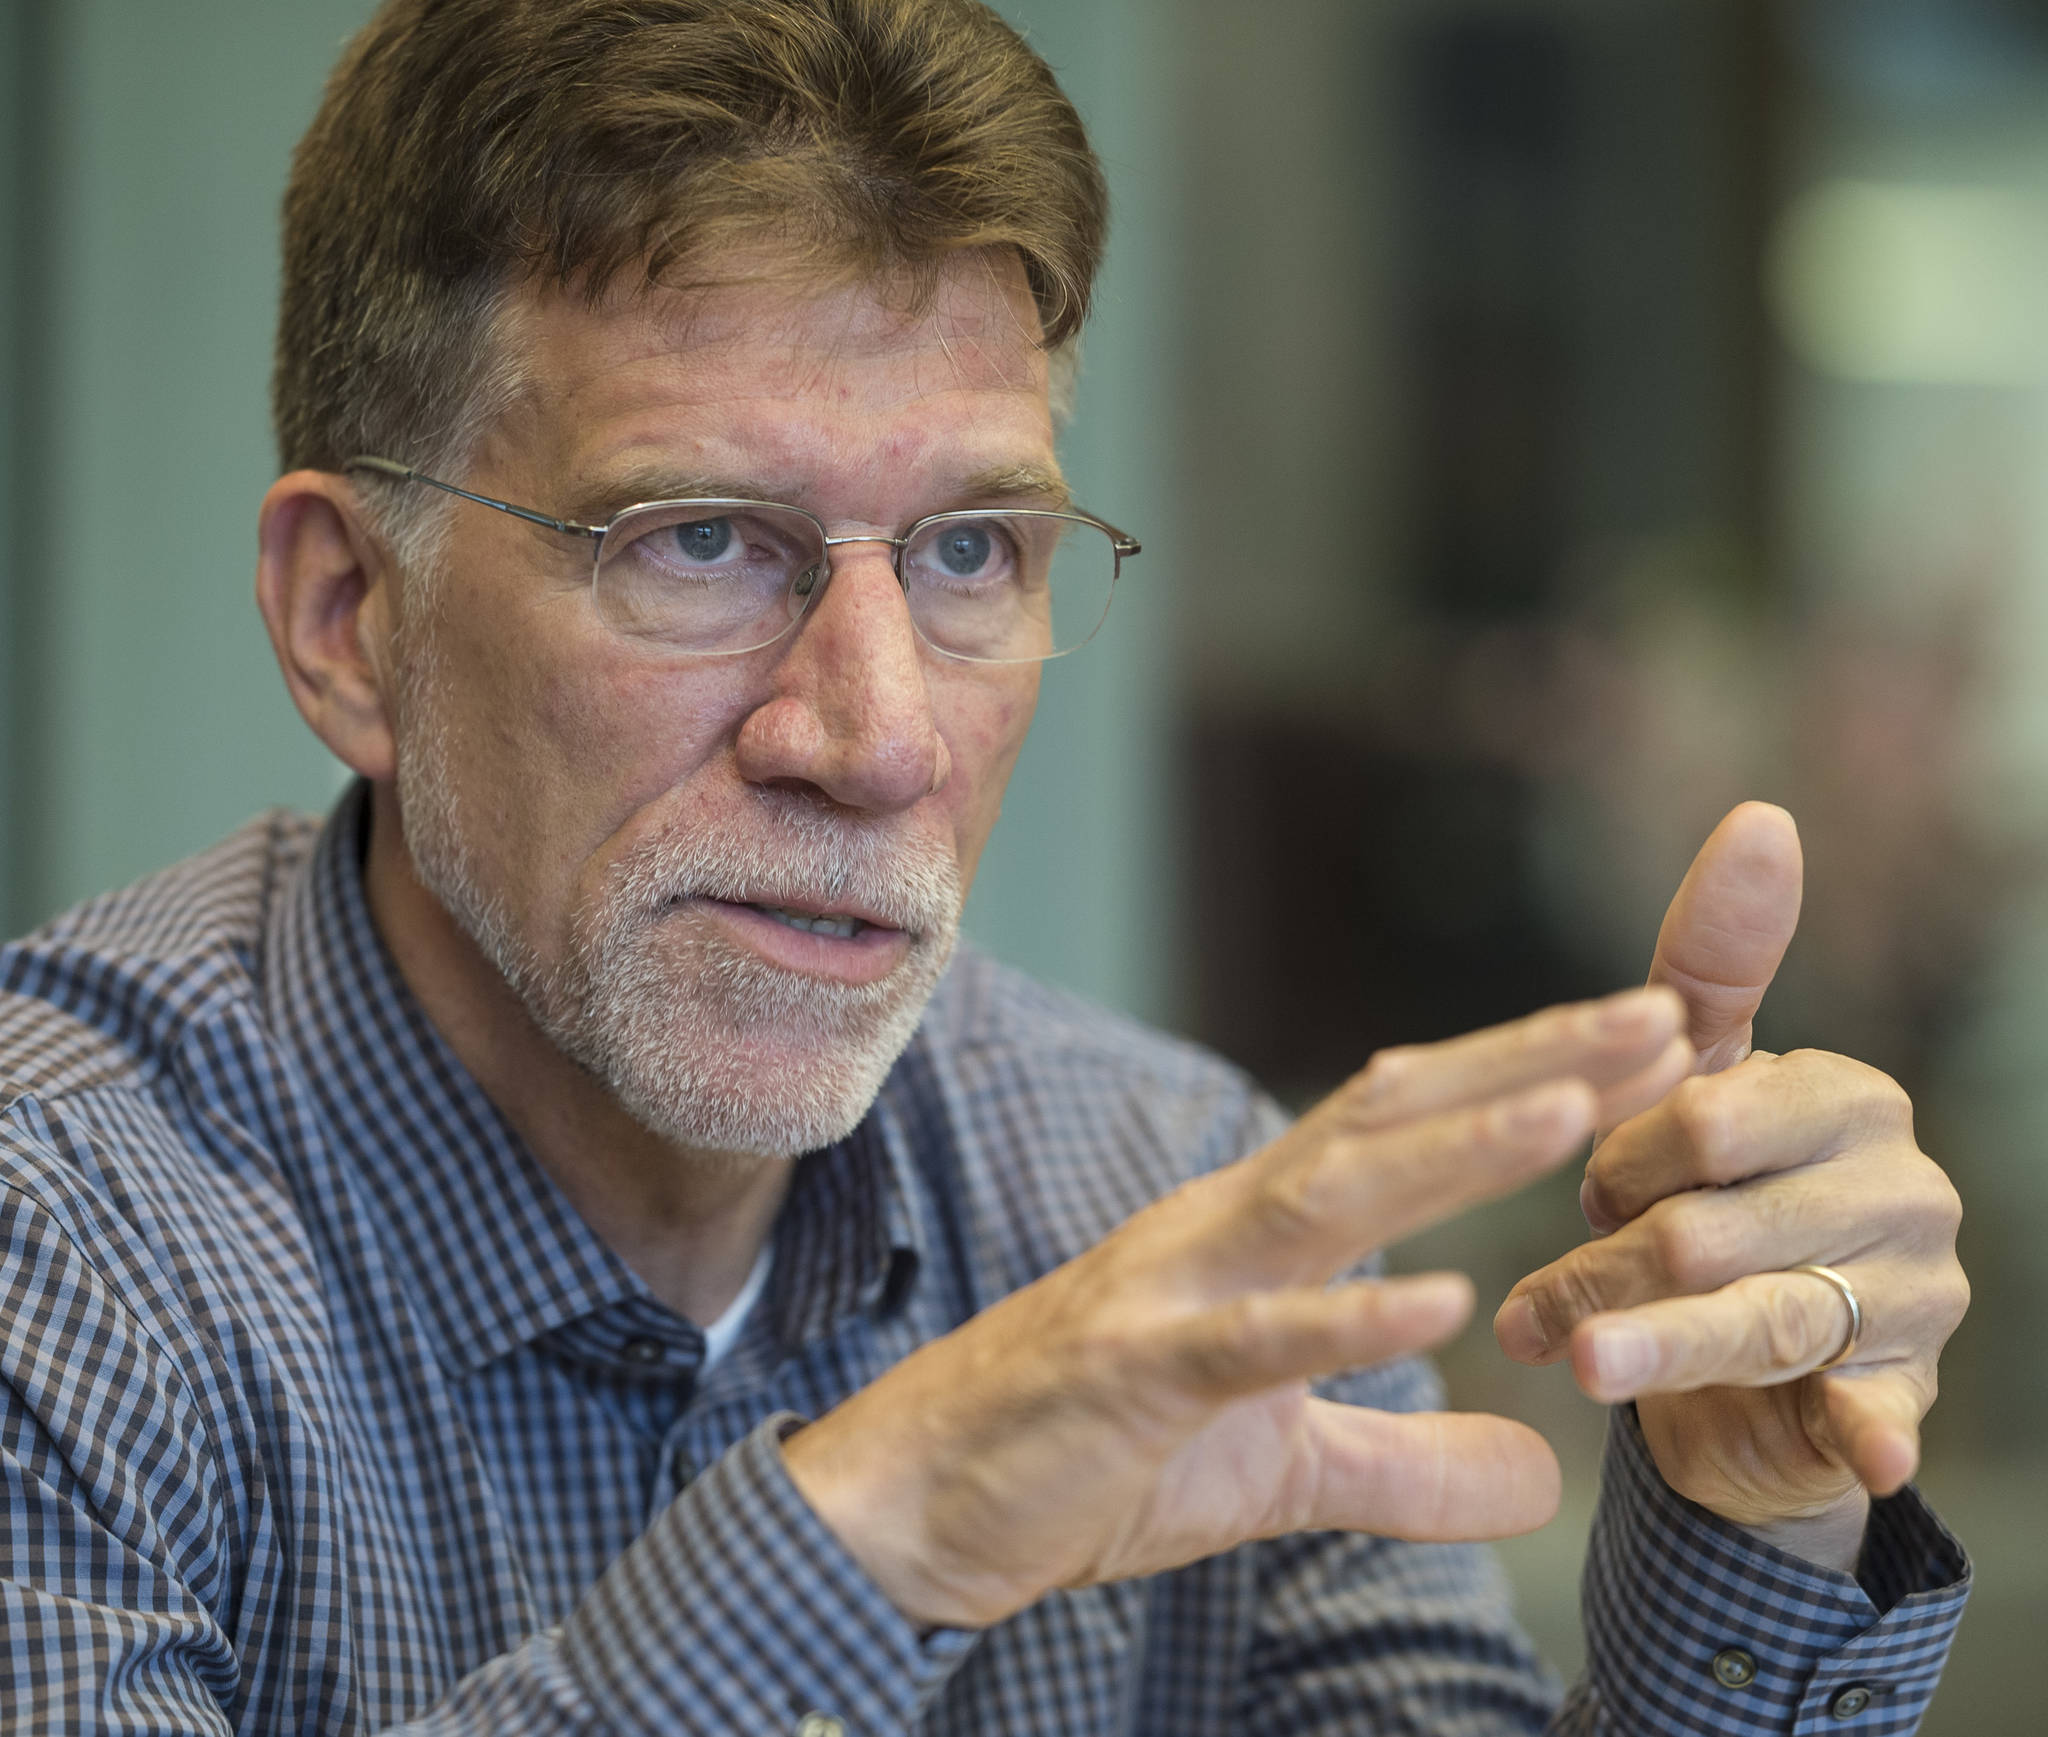 Dr. Steve Atwater, Executive Dean of the university’s new Alaska College of Education, speaks during an interview at the University of Alaska Southeast on Friday, August 3, 2018. (Michael Penn | Juneau Empire)